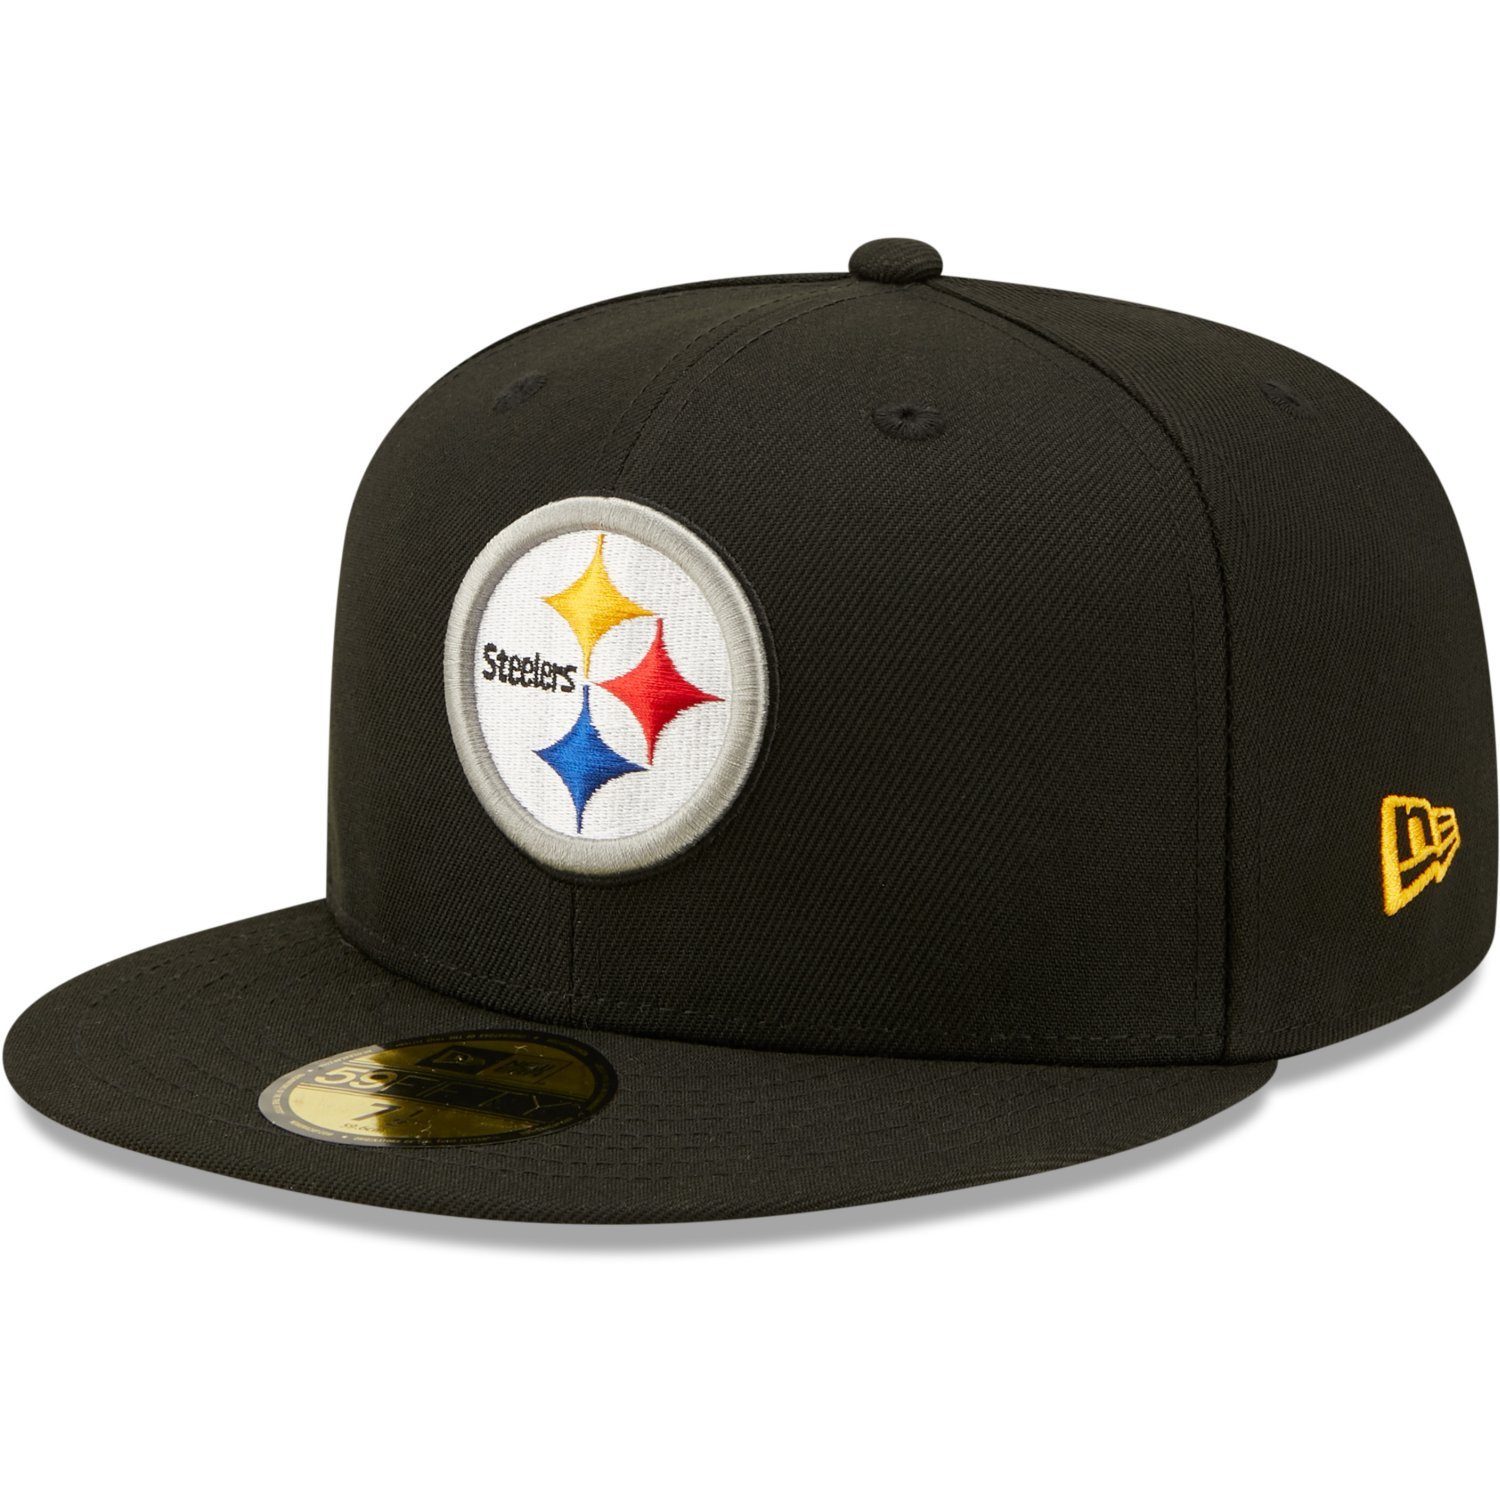 Era Fitted Steelers Seasons New Pittsburgh 80 Cap 59Fifty